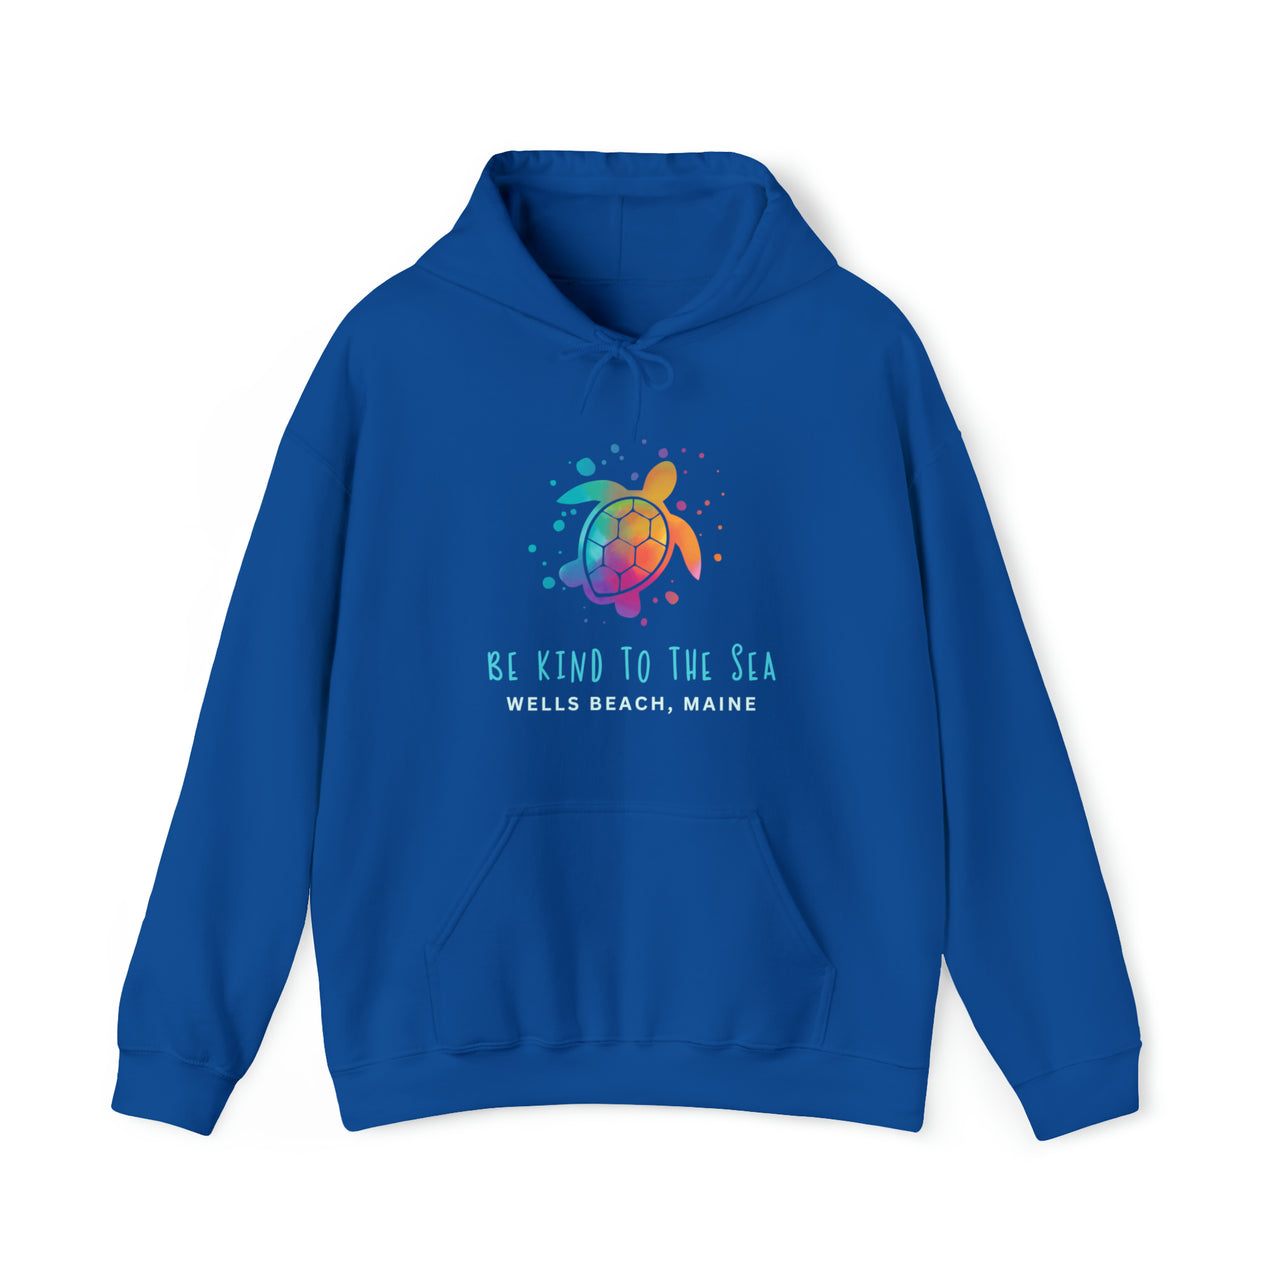 Be Kind to the Sea Heavy Blend Hooded Sweatshirt, Personalized, Royal